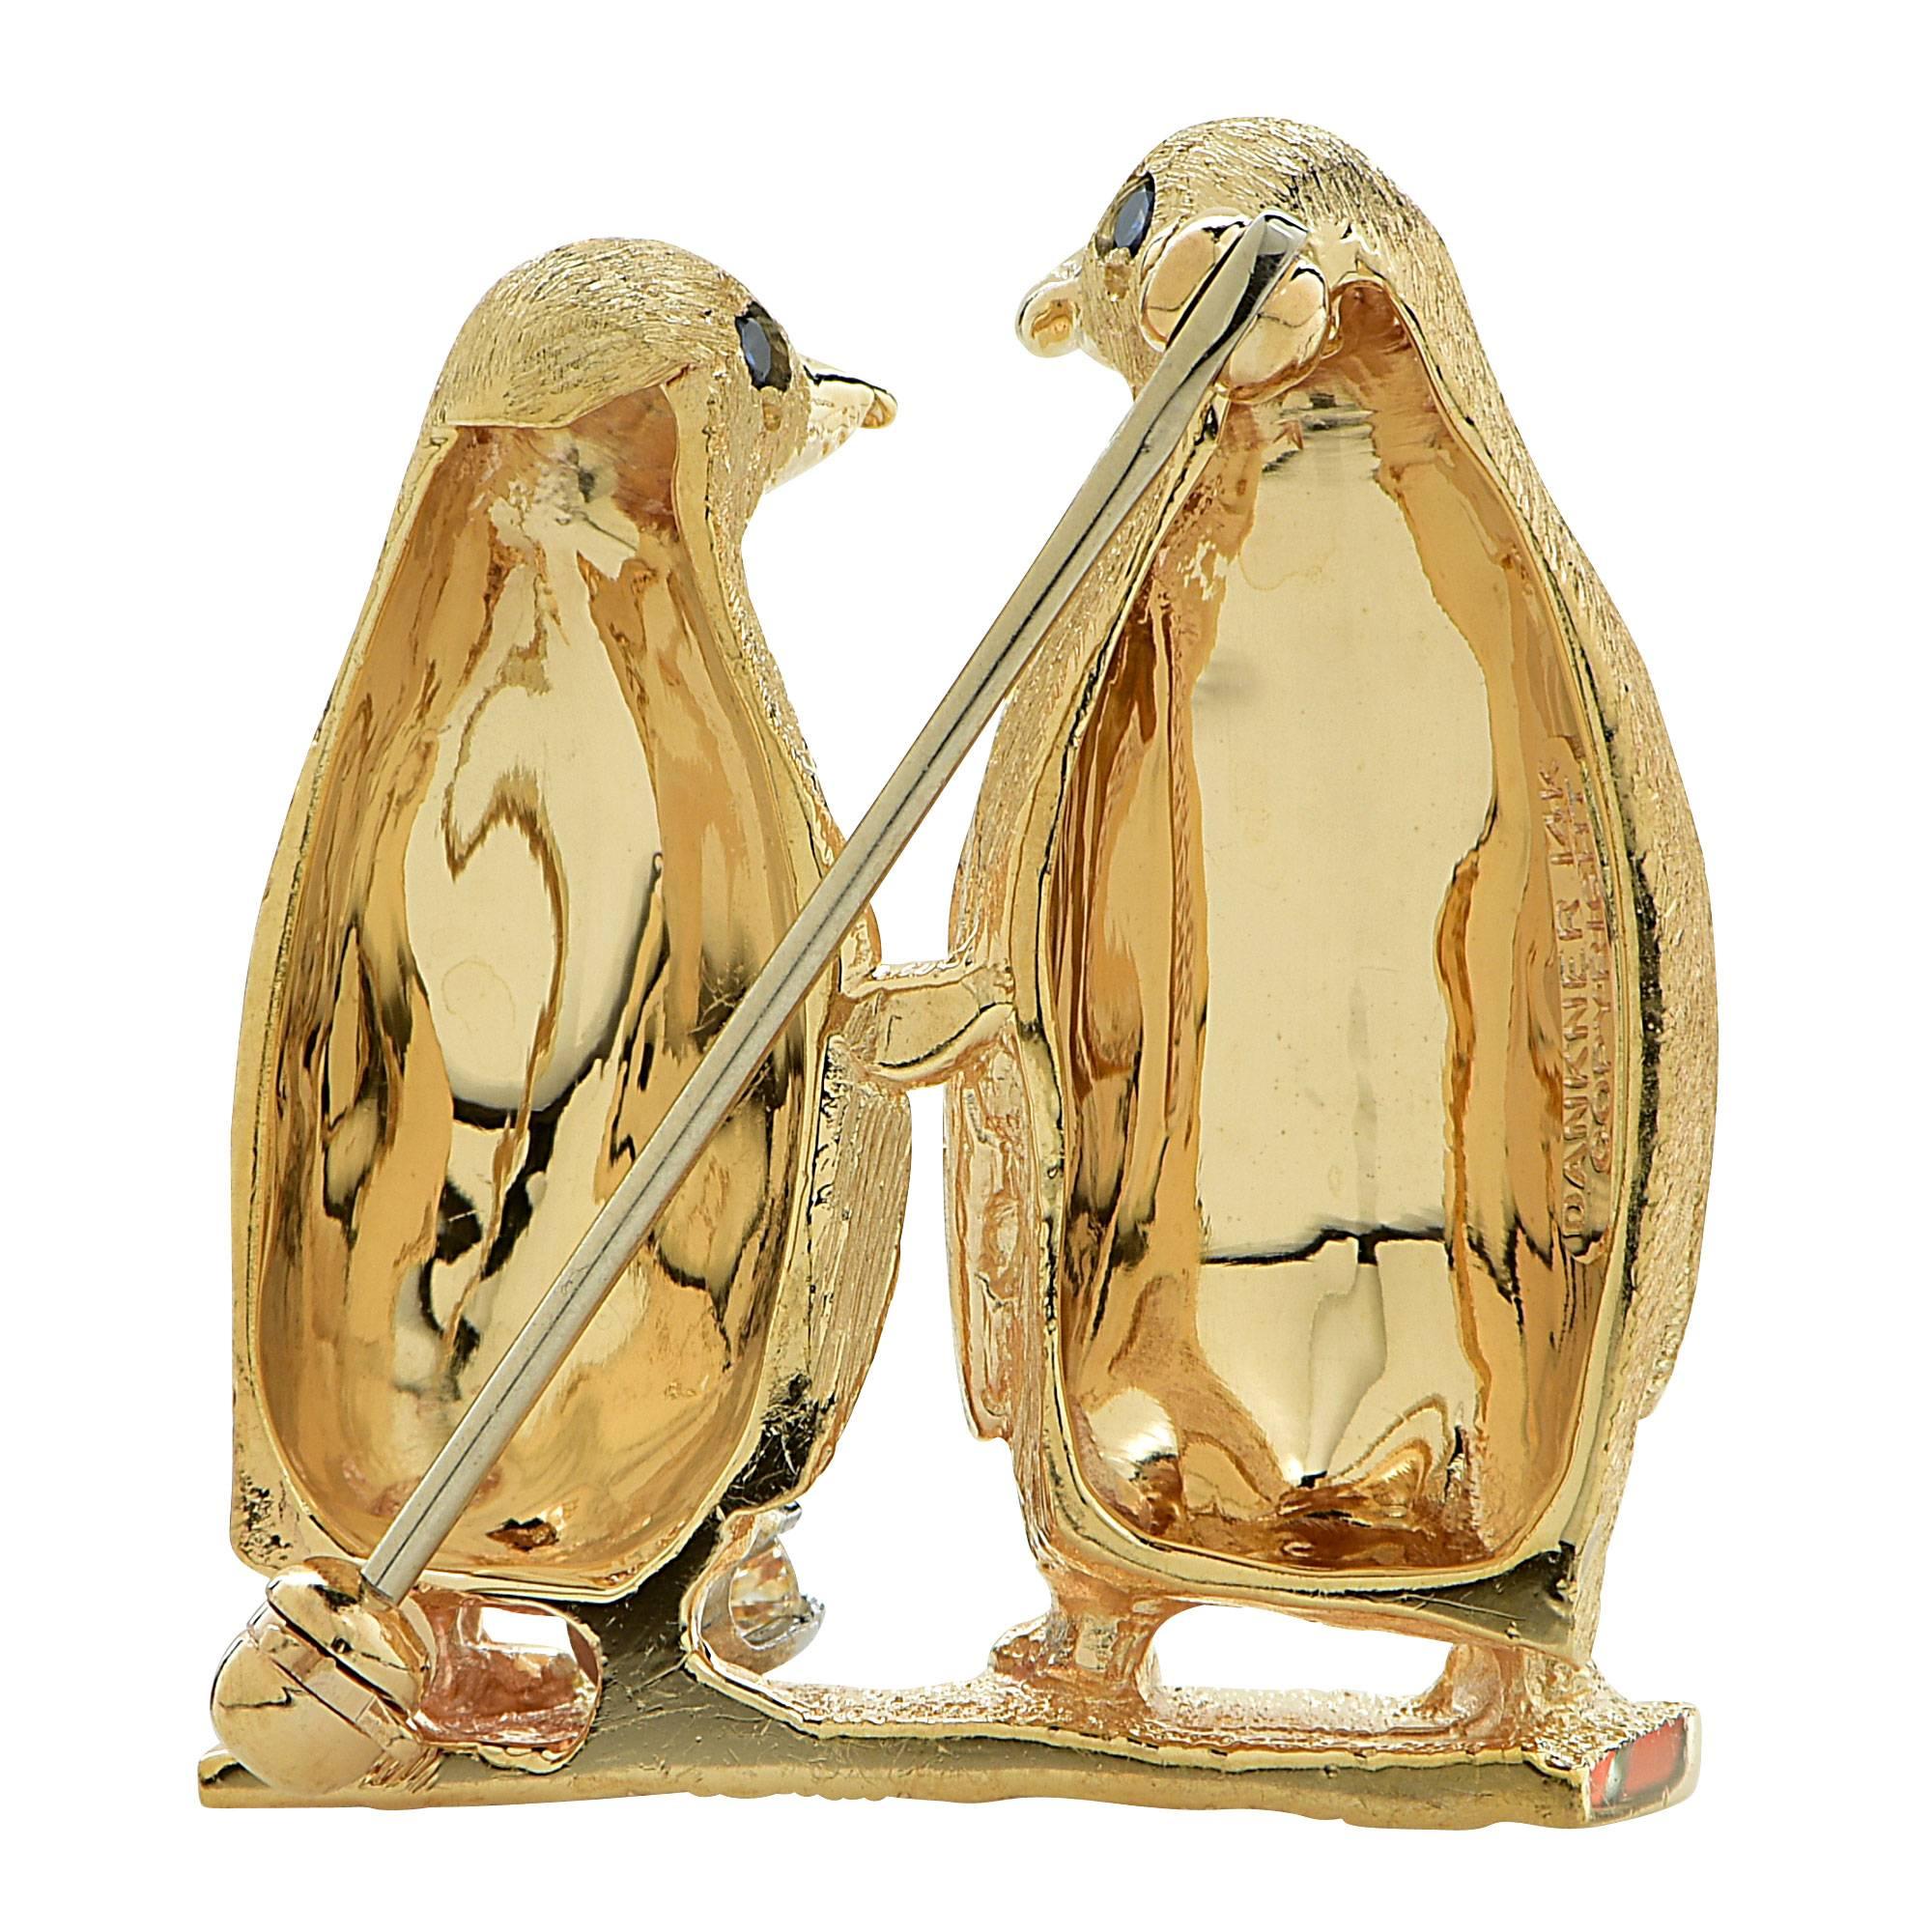 14k yellow gold Penguin brooch featuring 2 round cut sapphires for eyes.

Metal weight: 10.88 grams

This sapphire penguin brooch is accompanied by a retail appraisal performed by a GIA Graduate Gemologist.